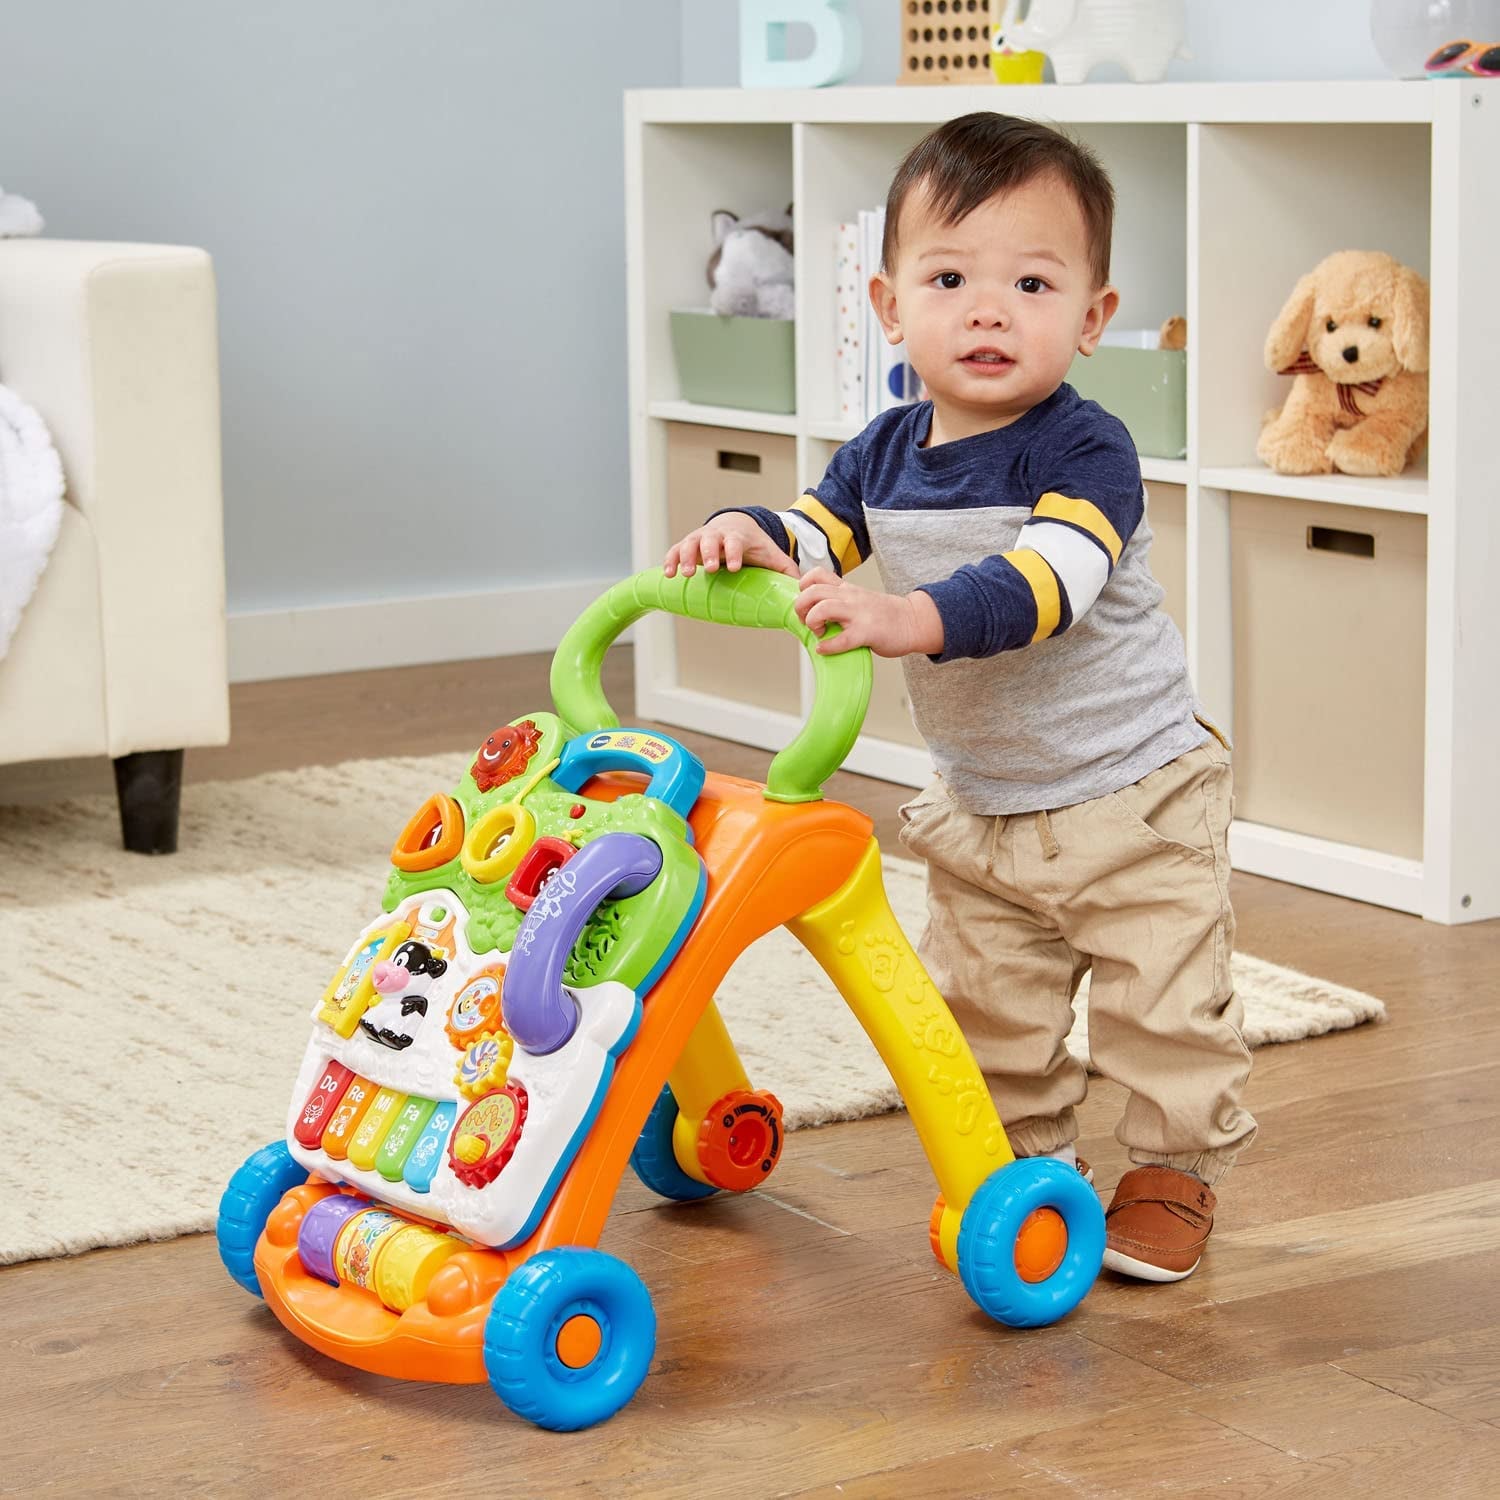 20 Of The Best Toys And Gift Ideas For A 1-Year-Old In 2023 | Popsugar  Family